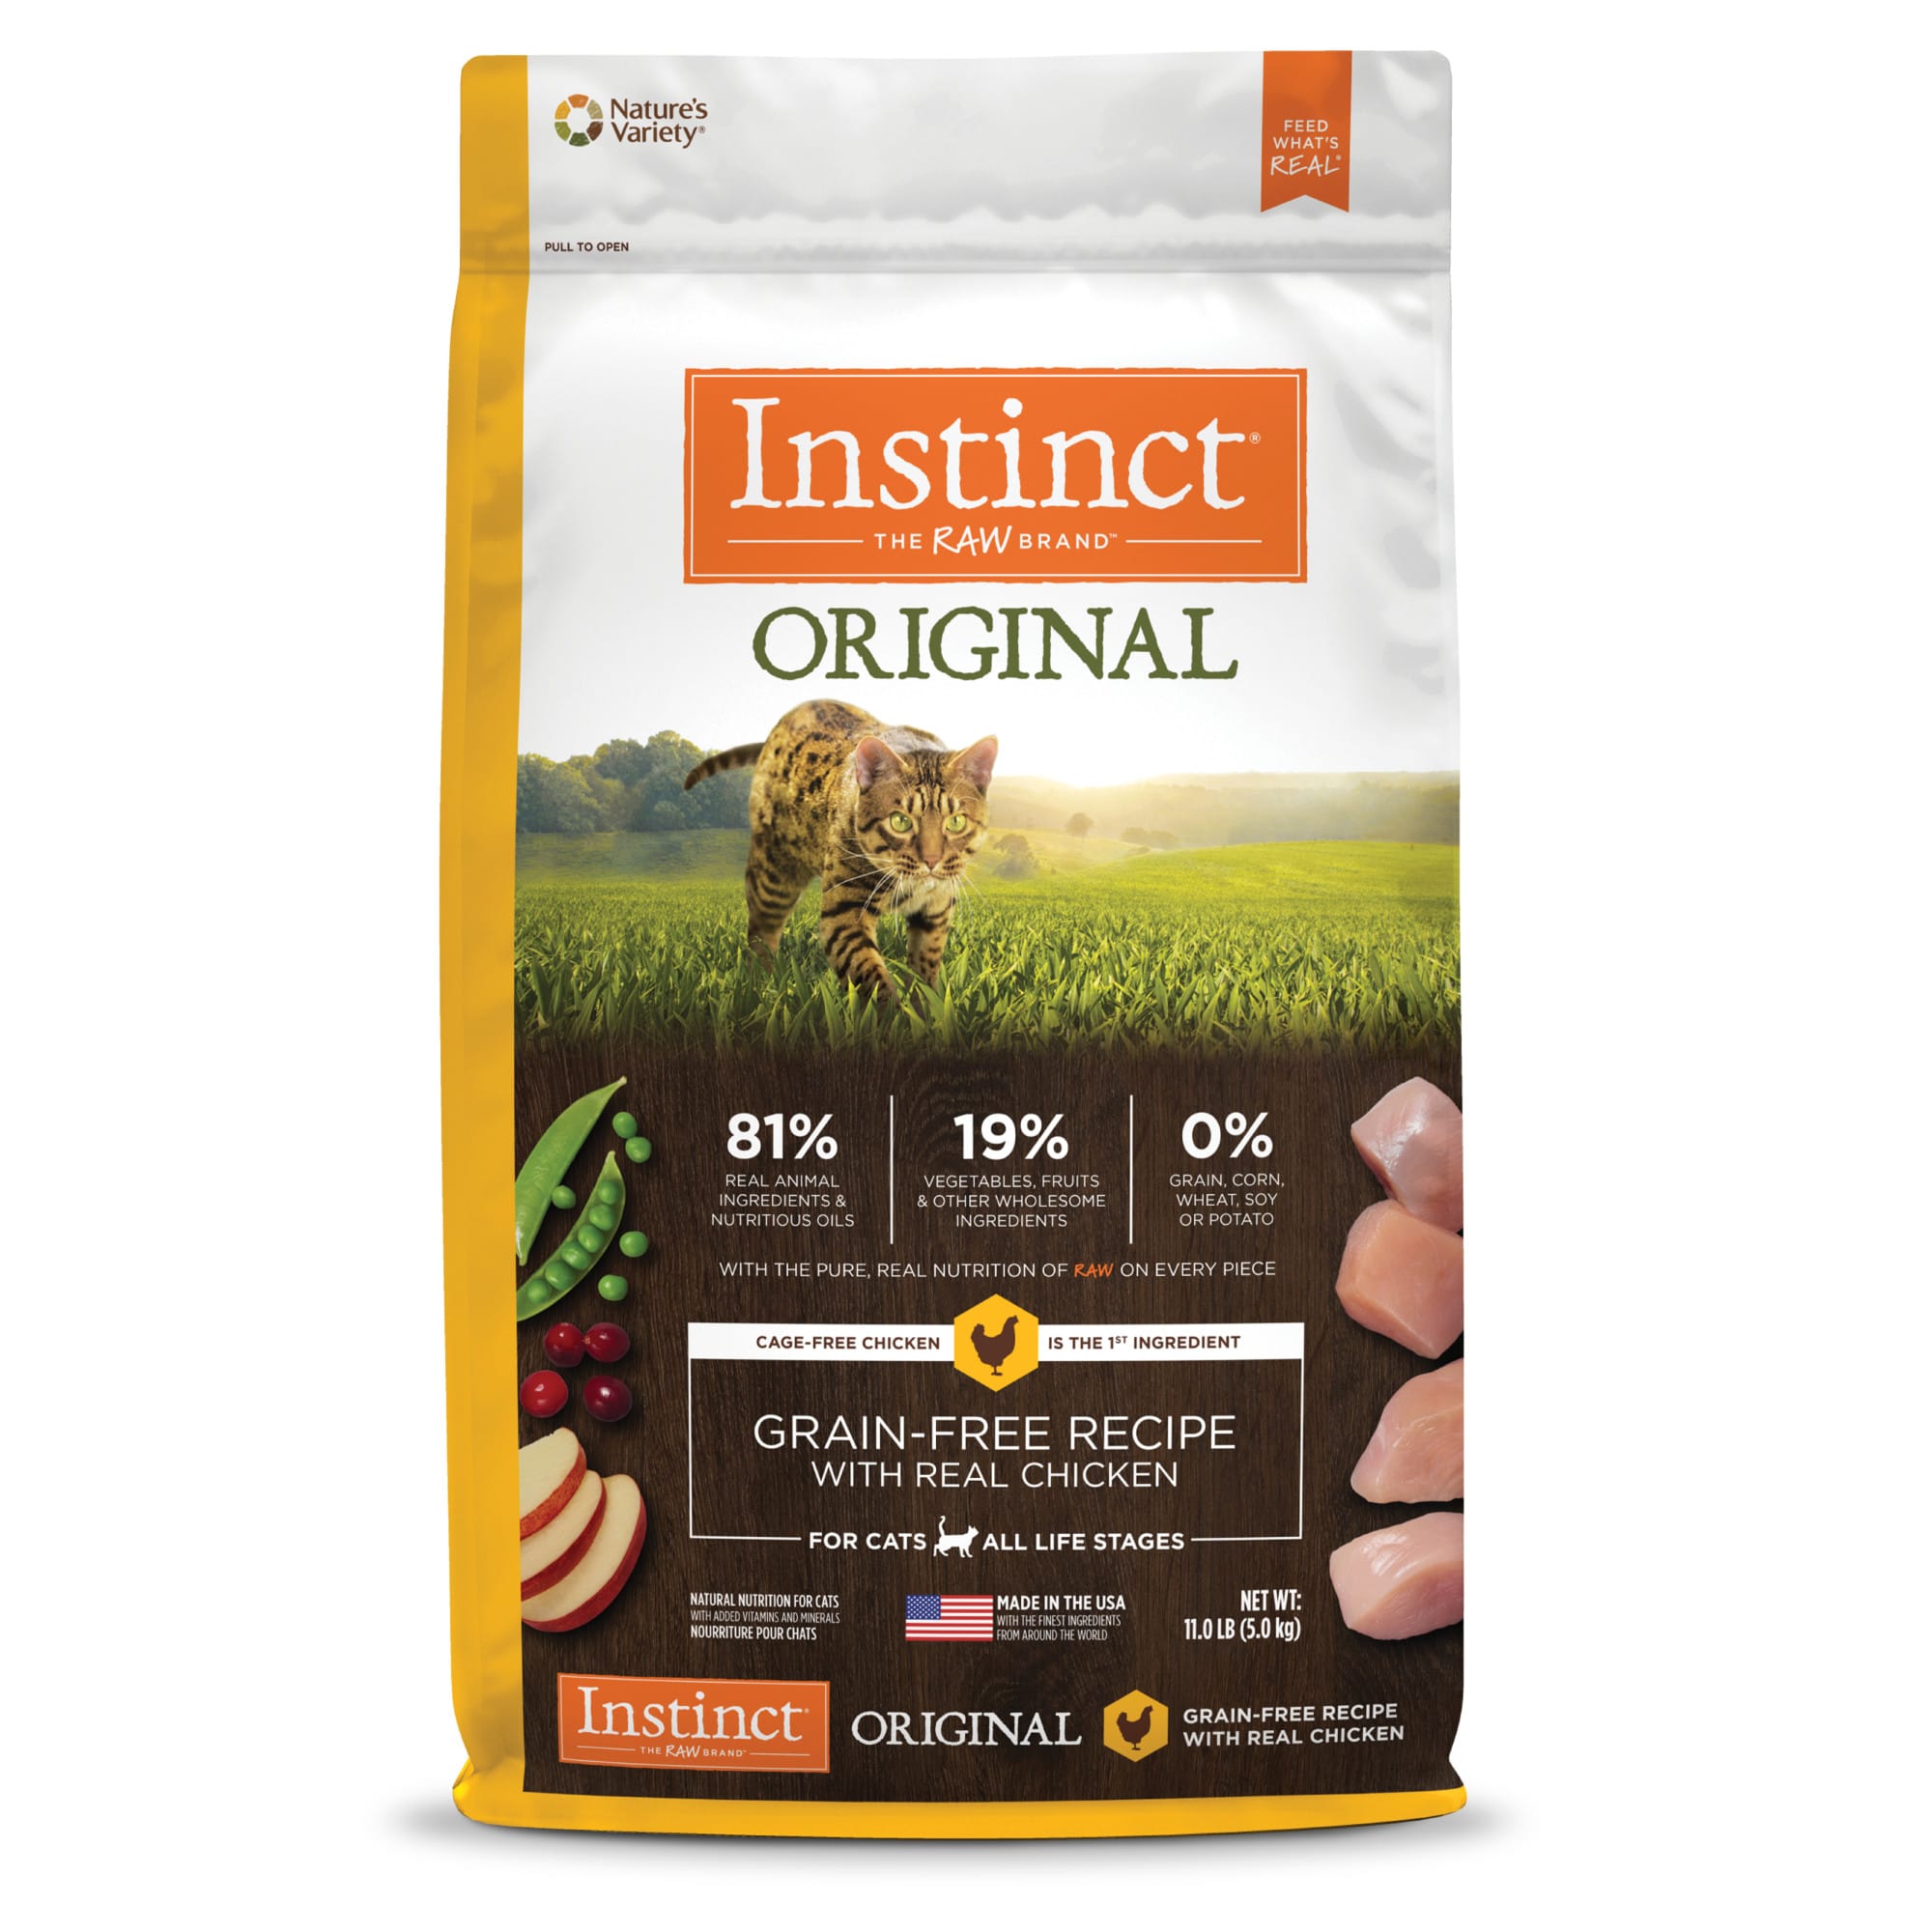 Instinct Original Grain-Free Recipe with Real Chicken Freeze-Dried Raw Coated Dry Cat Food image